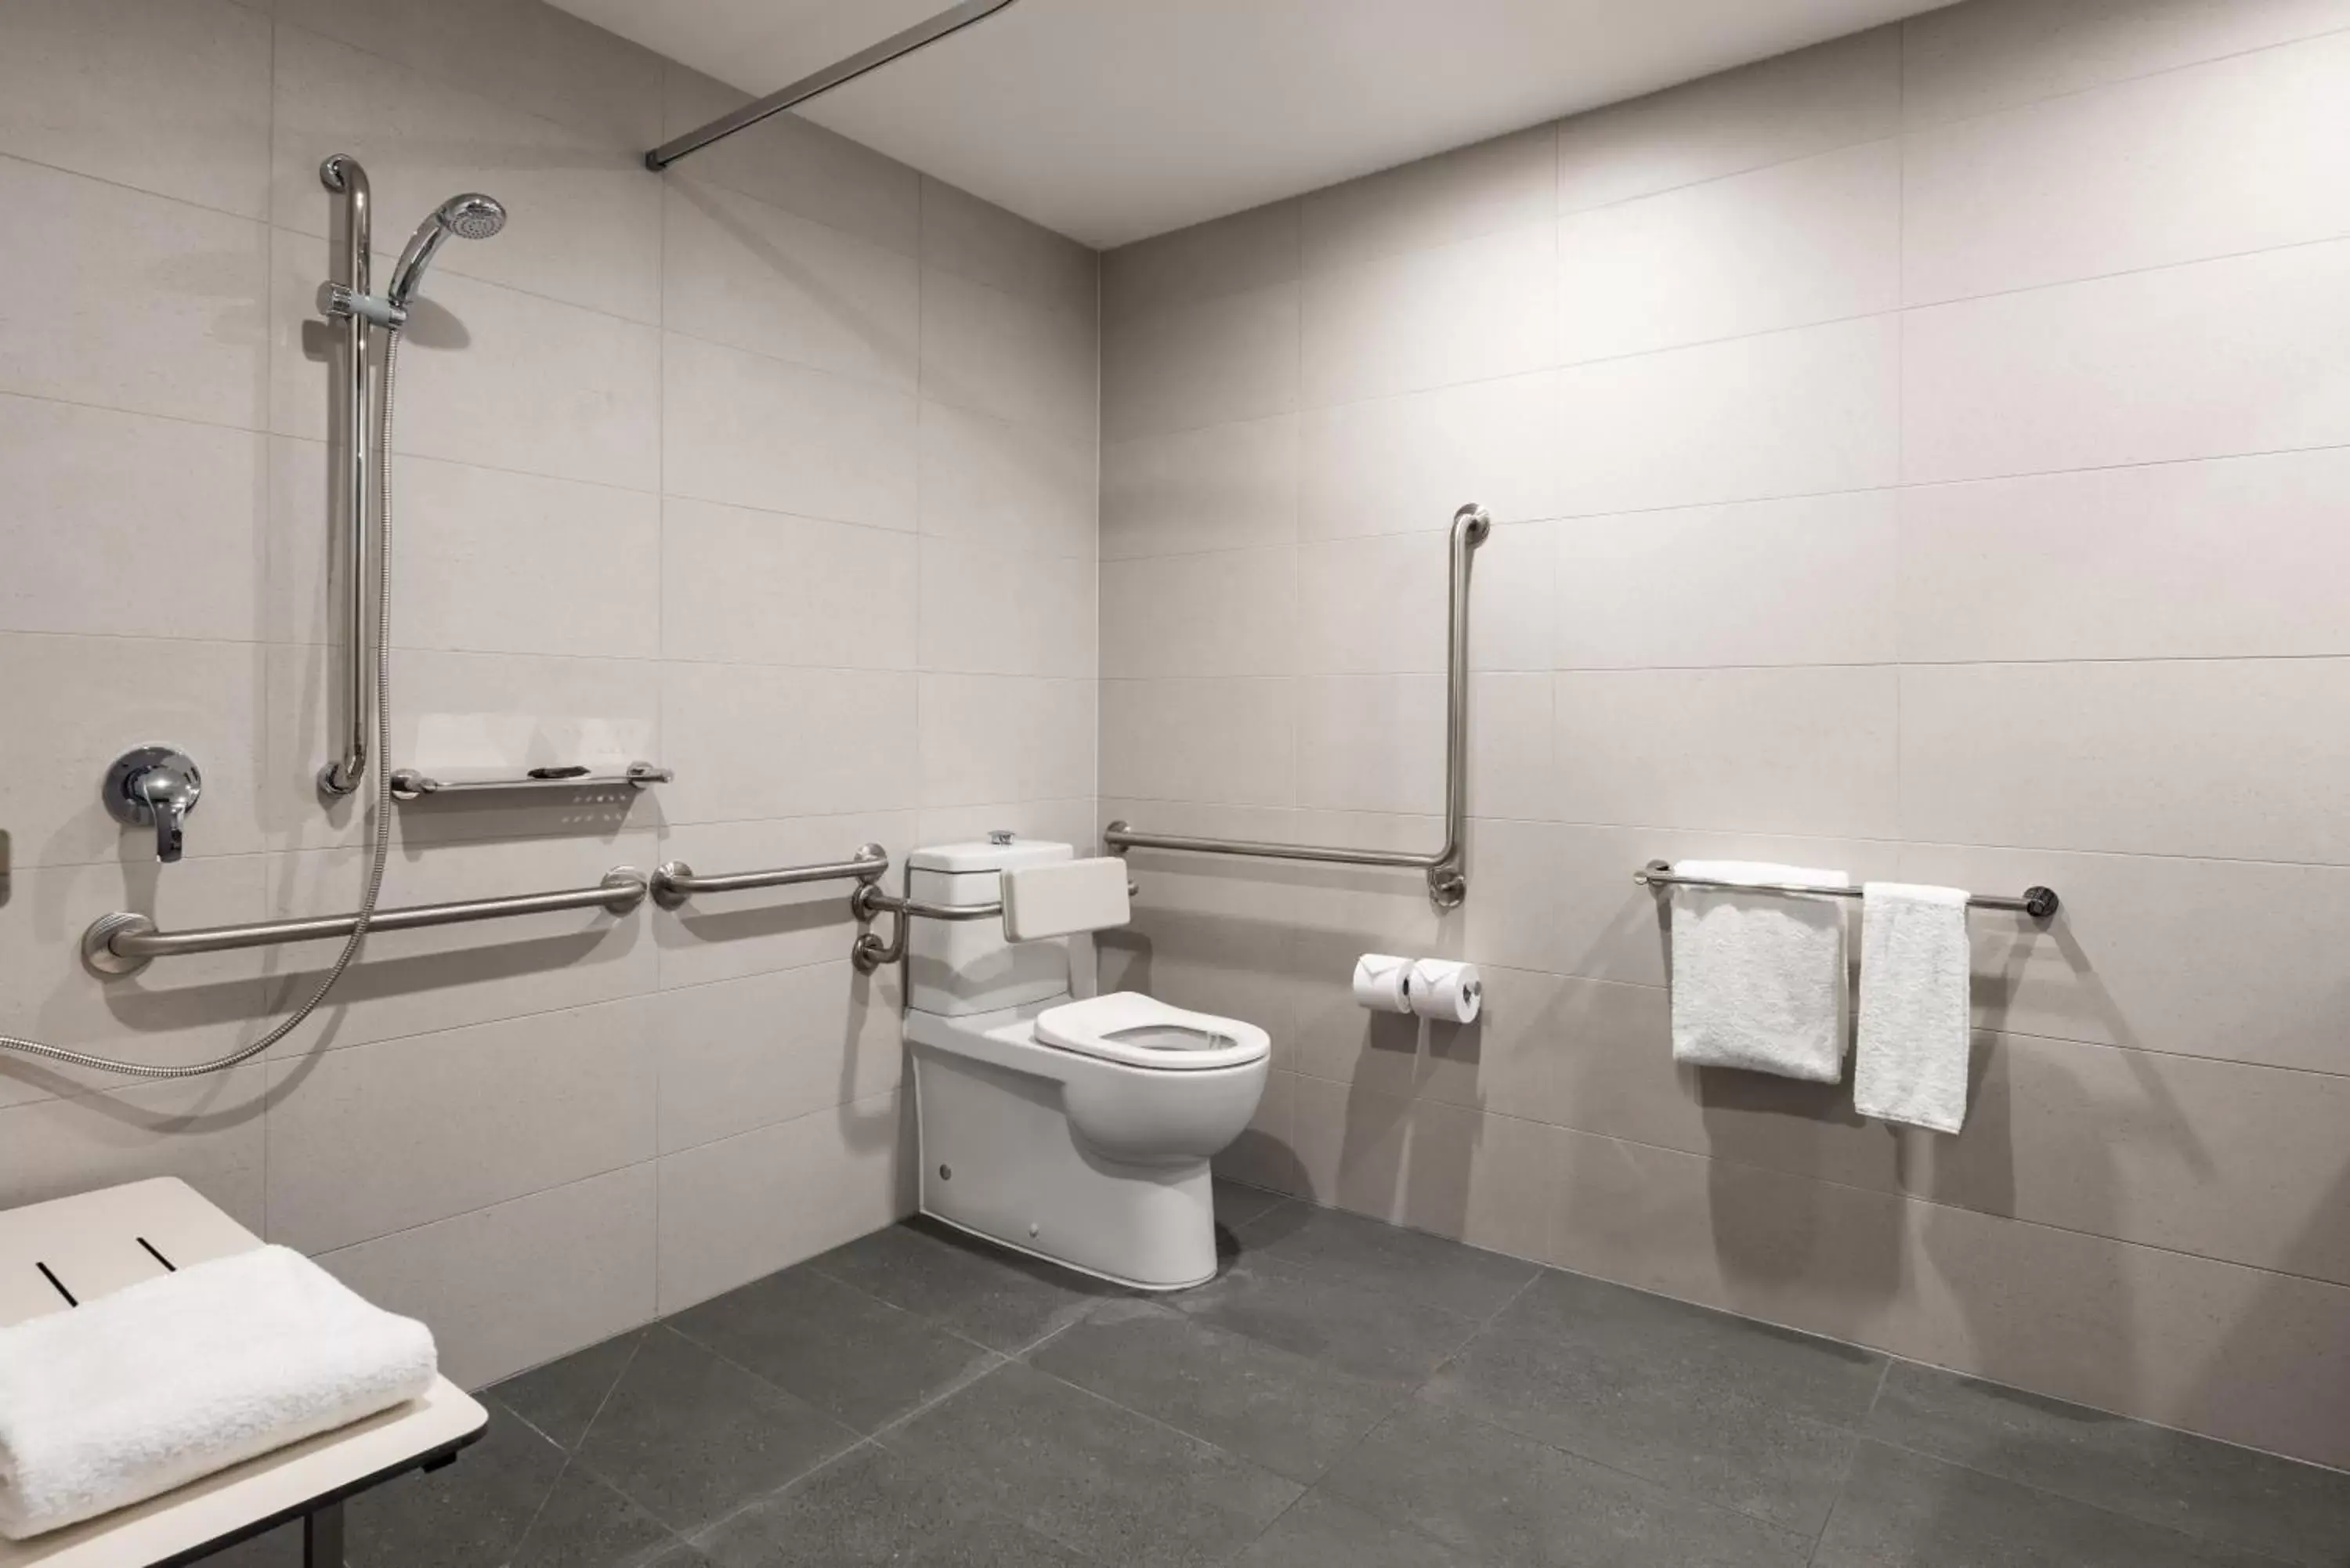 Facility for disabled guests, Bathroom in Novotel Perth Murray Street